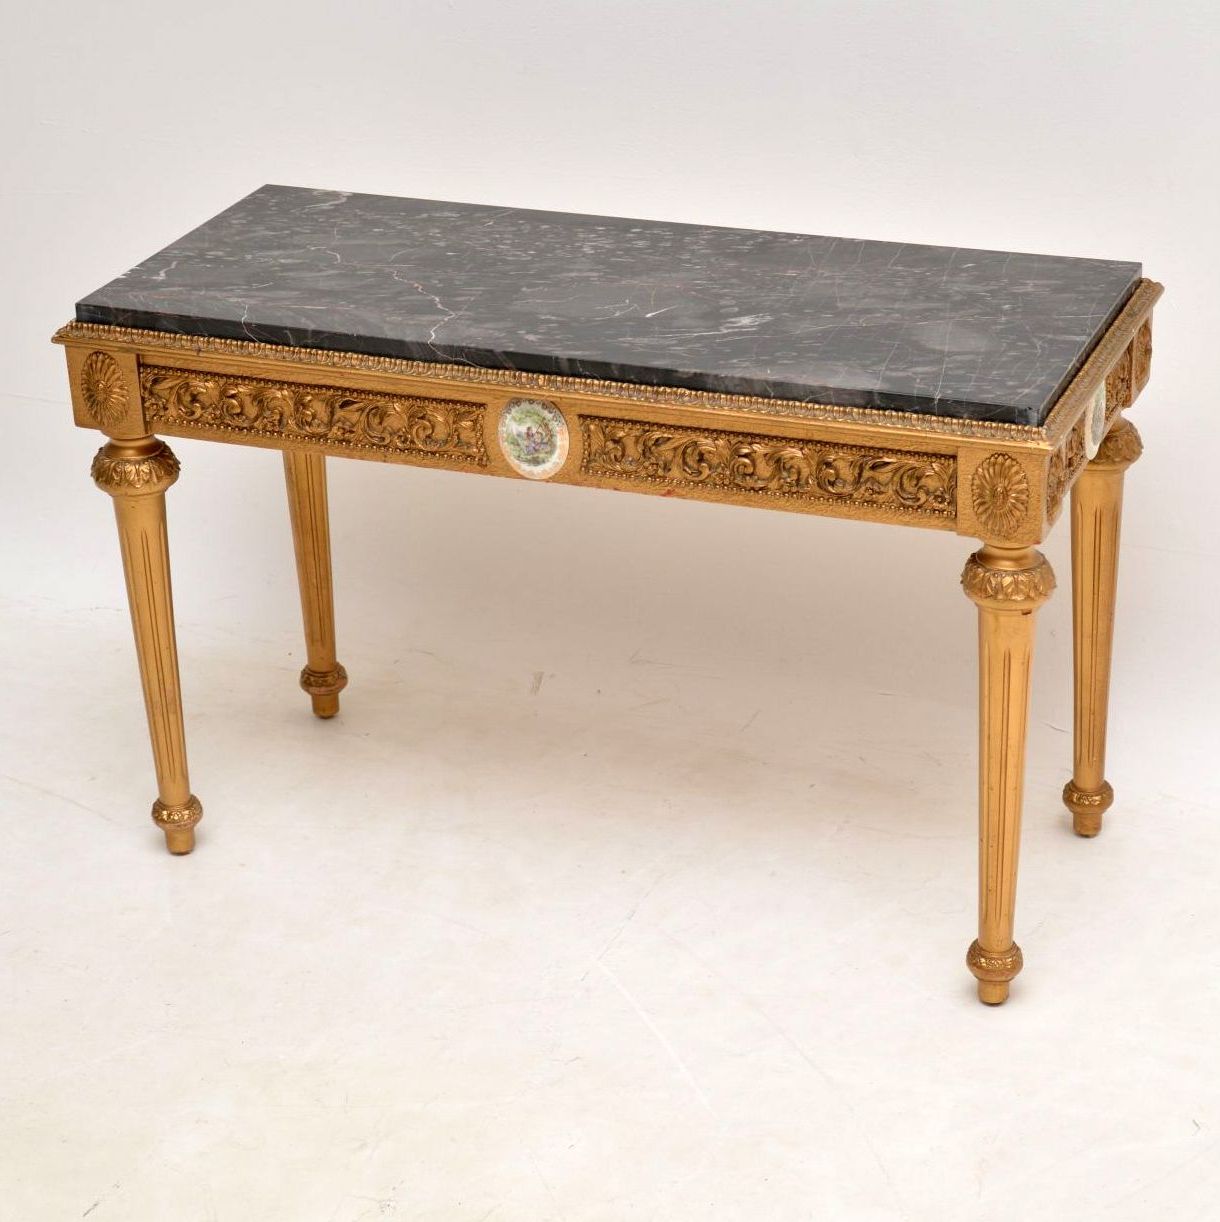 2019 Marble Top Coffee Tables Within Antique French Marble Top Gilt Coffee Table – Marylebone (View 7 of 20)